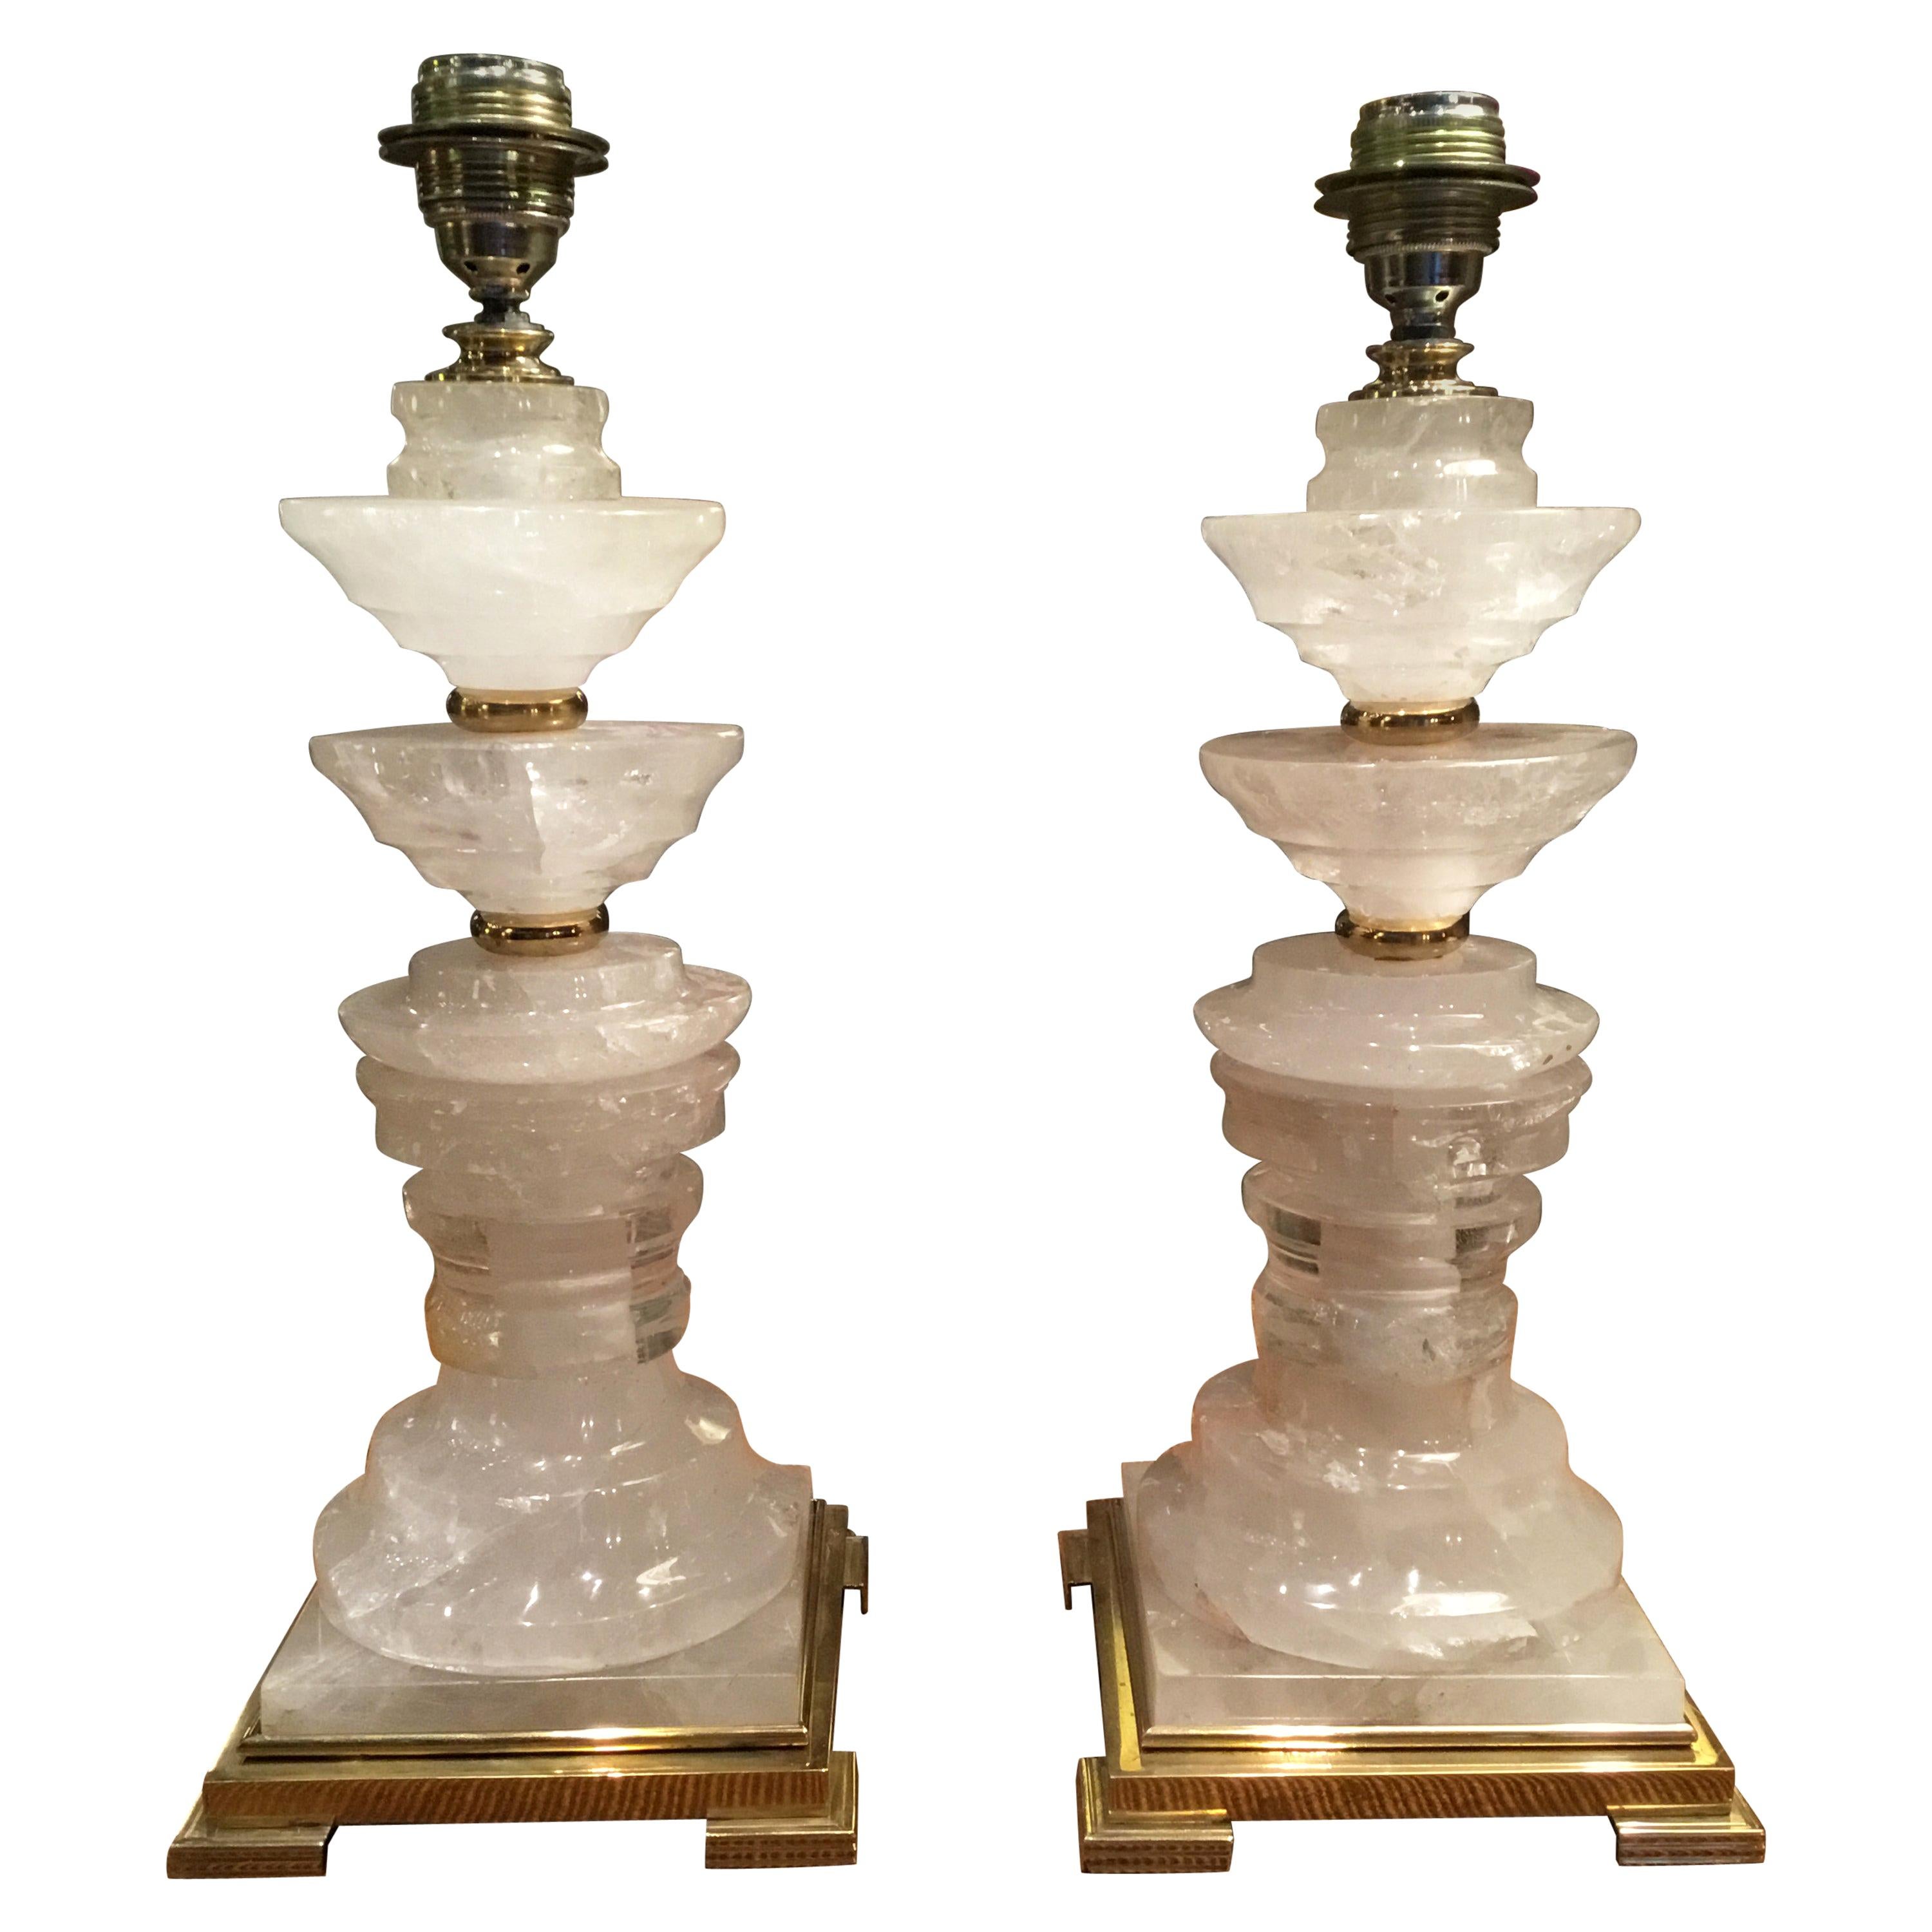 "Rocca" Crystal and Brass Table Lamp, Handmade in Italy by an Artisan